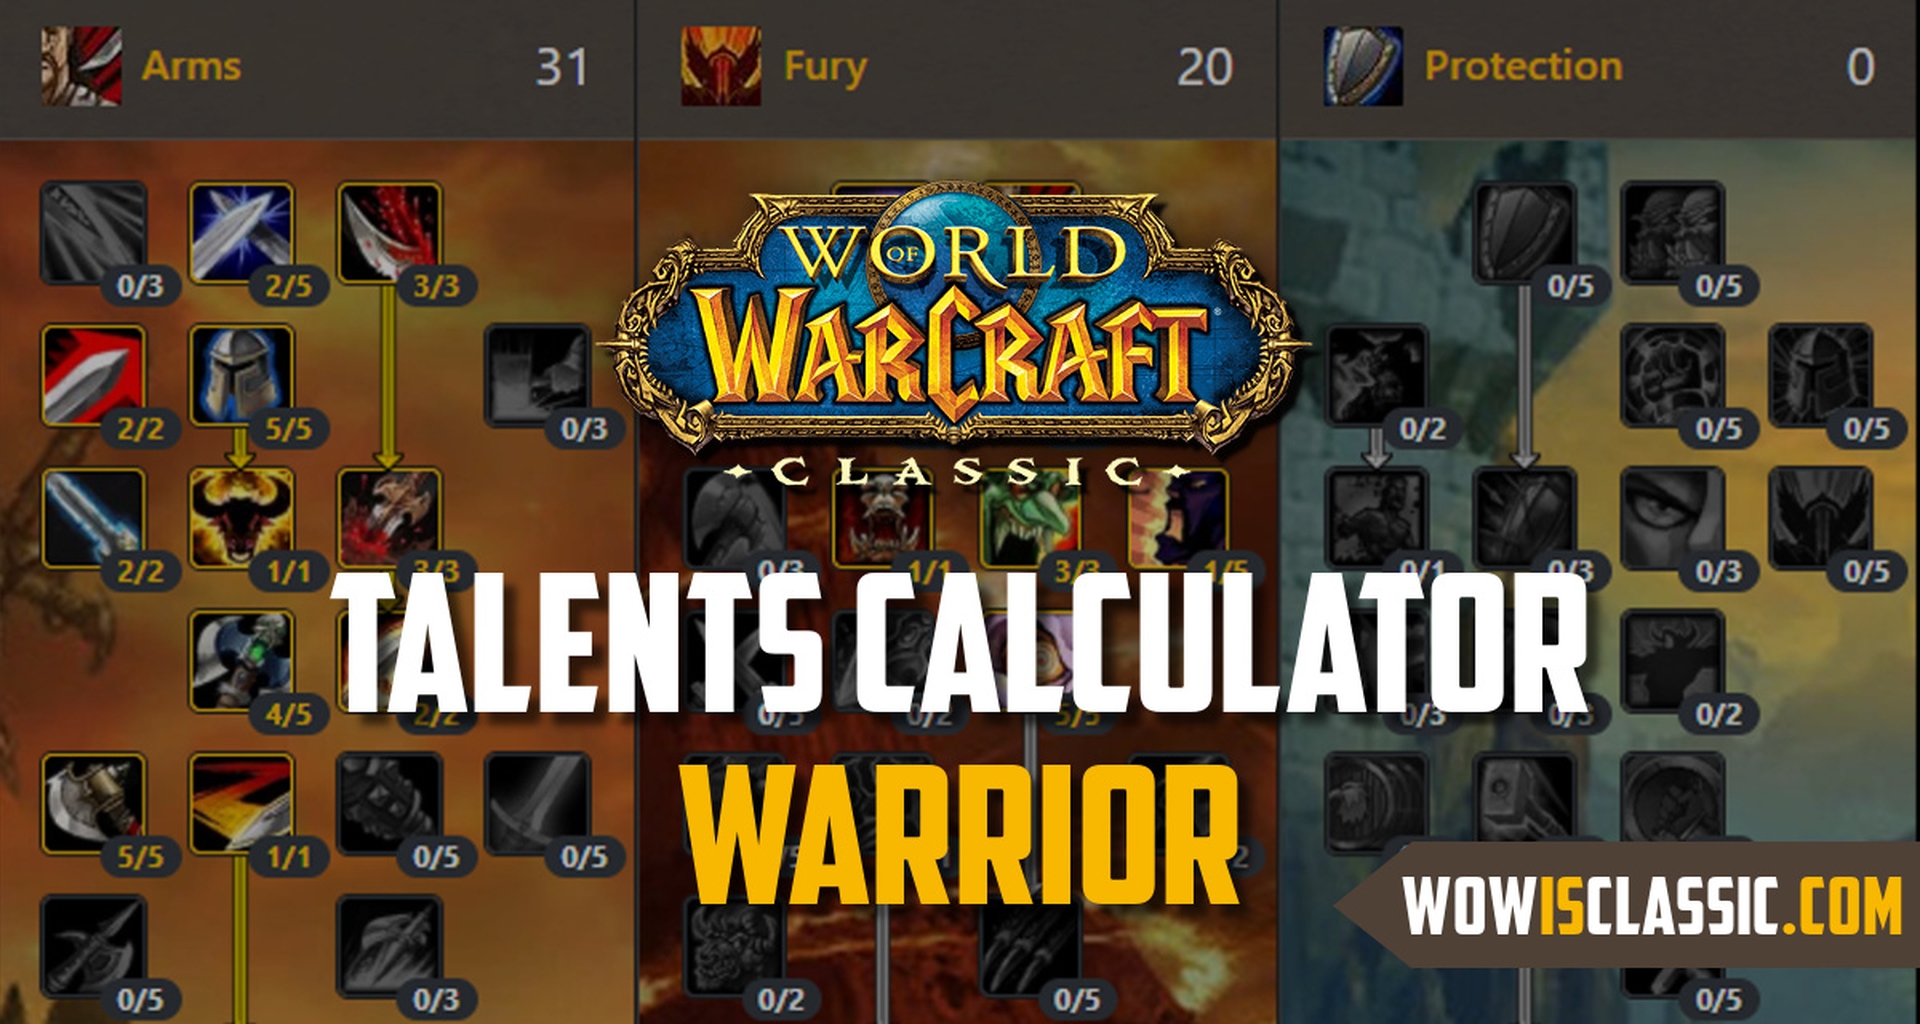 clearly make worse Award Warrior : Talent Calculator for Classic WoW + Top rated build